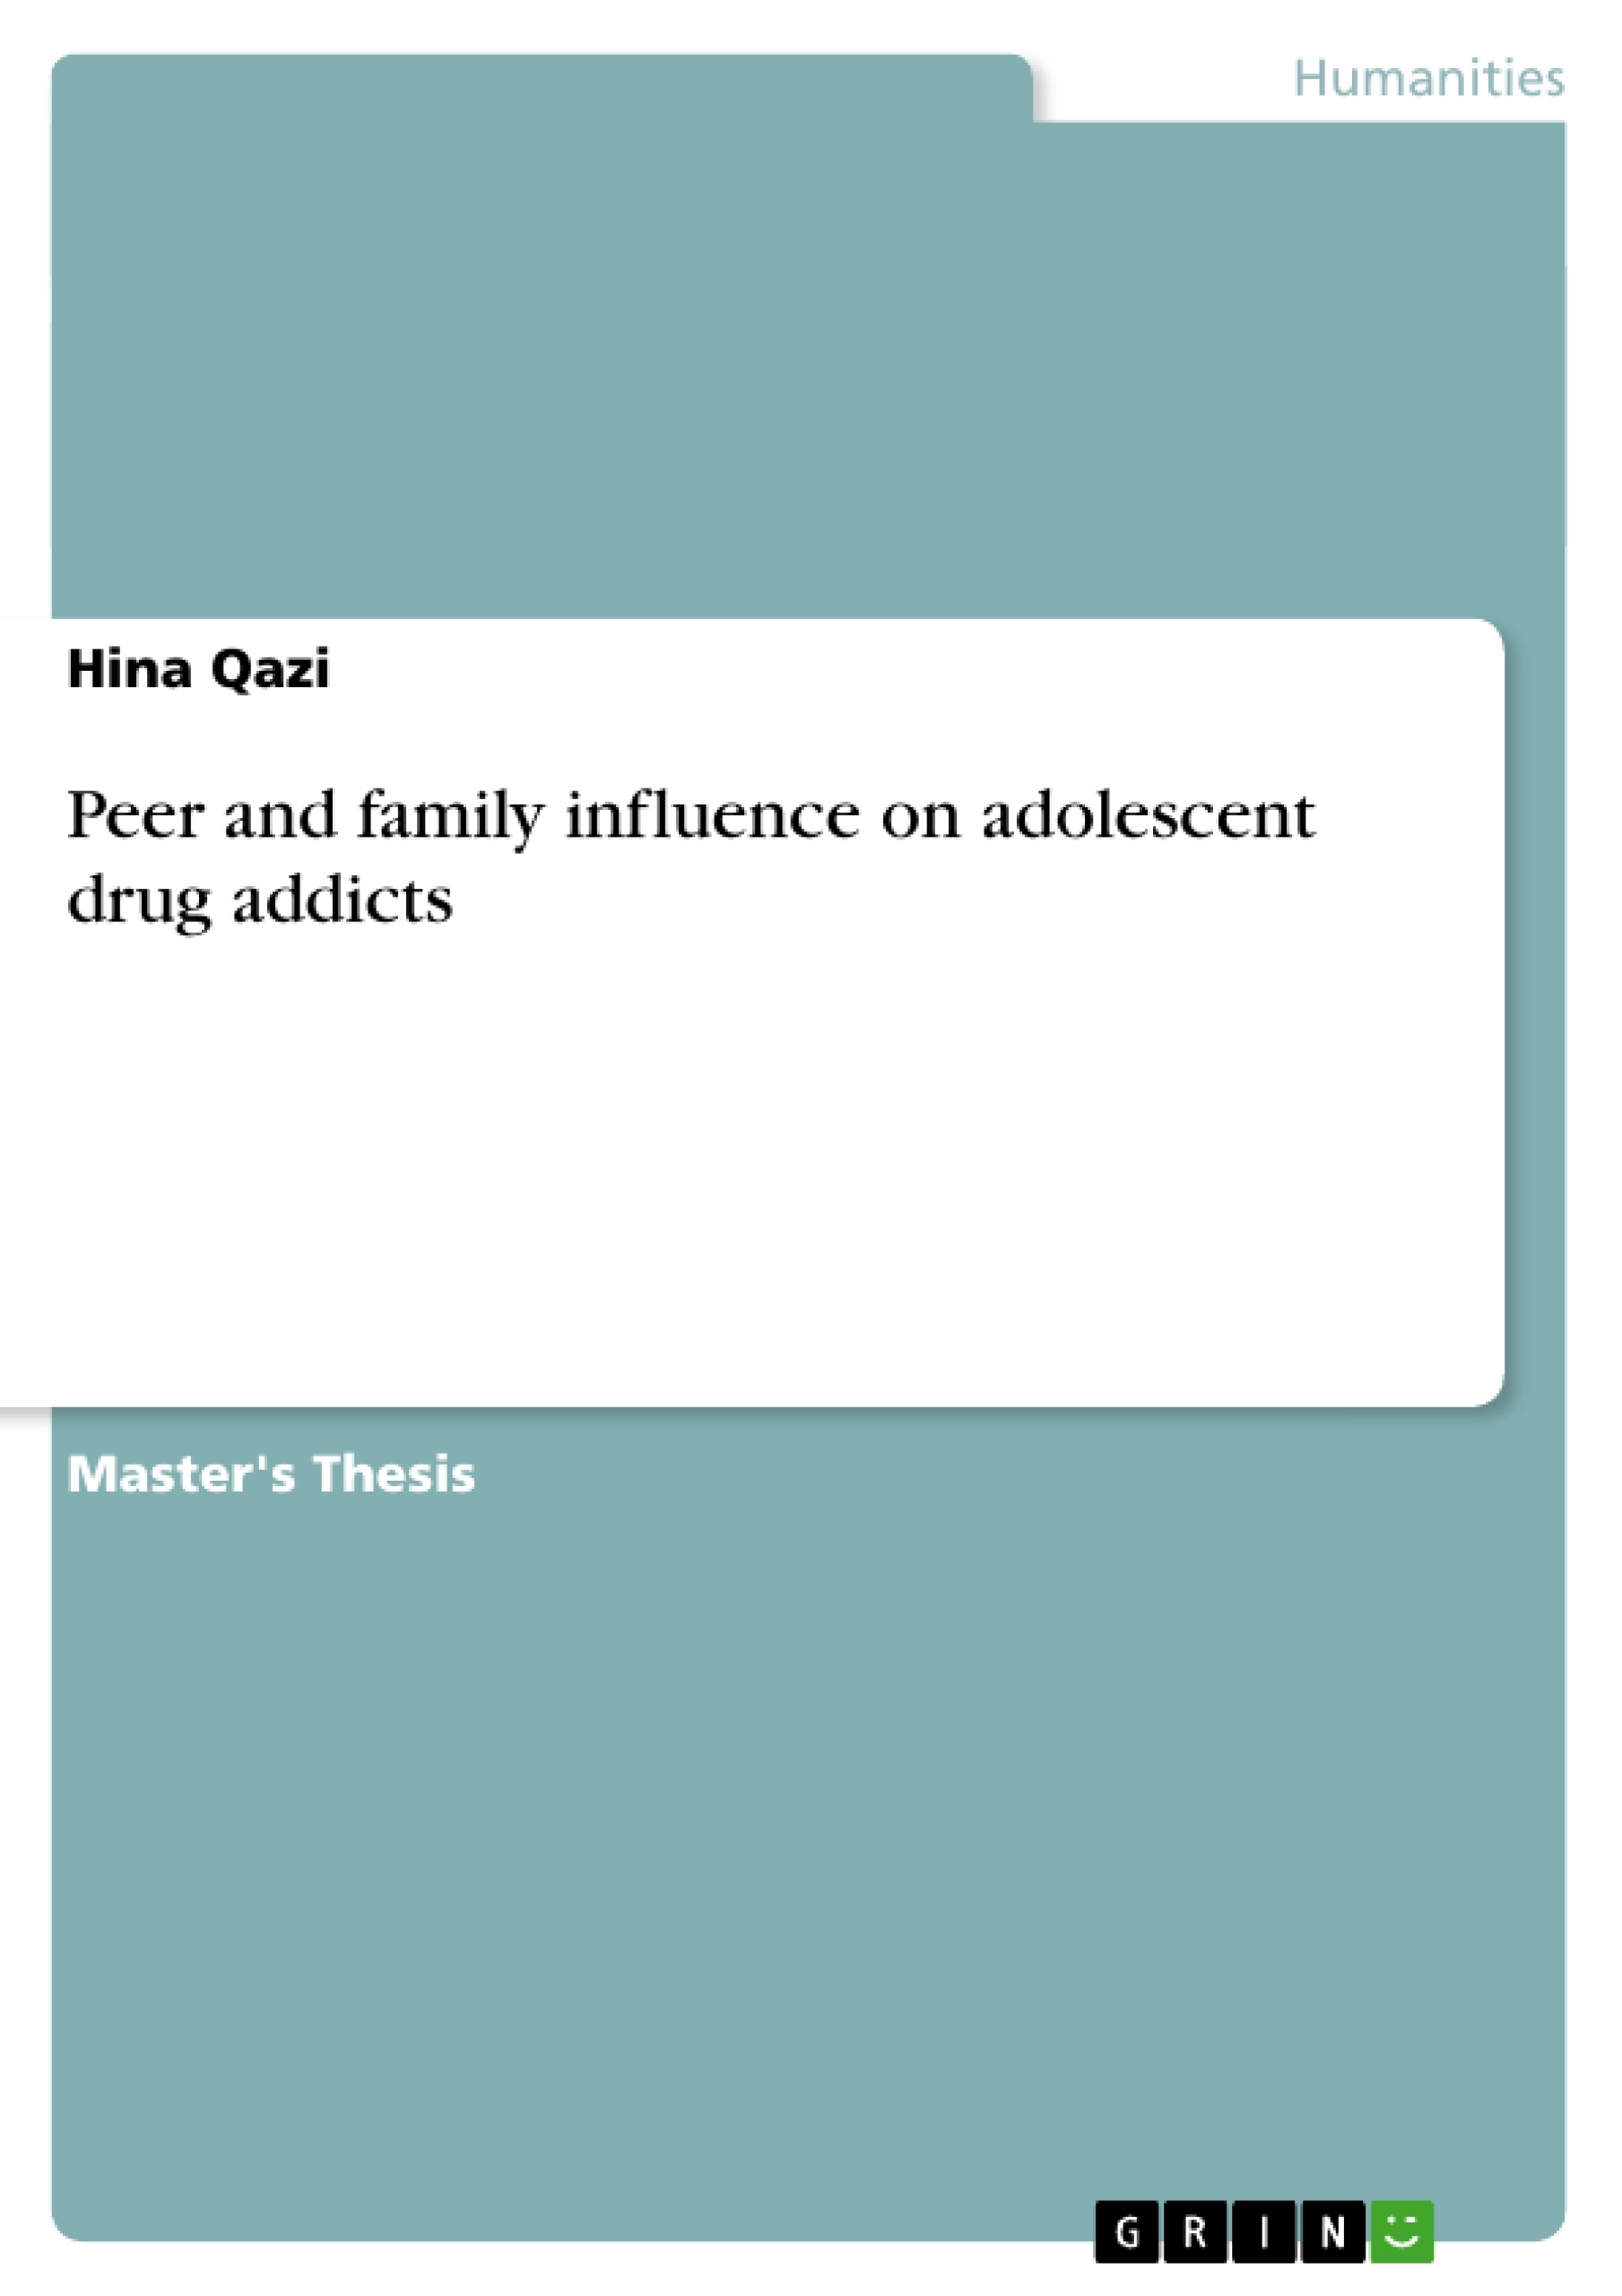 Title: Peer and family influence on adolescent drug addicts